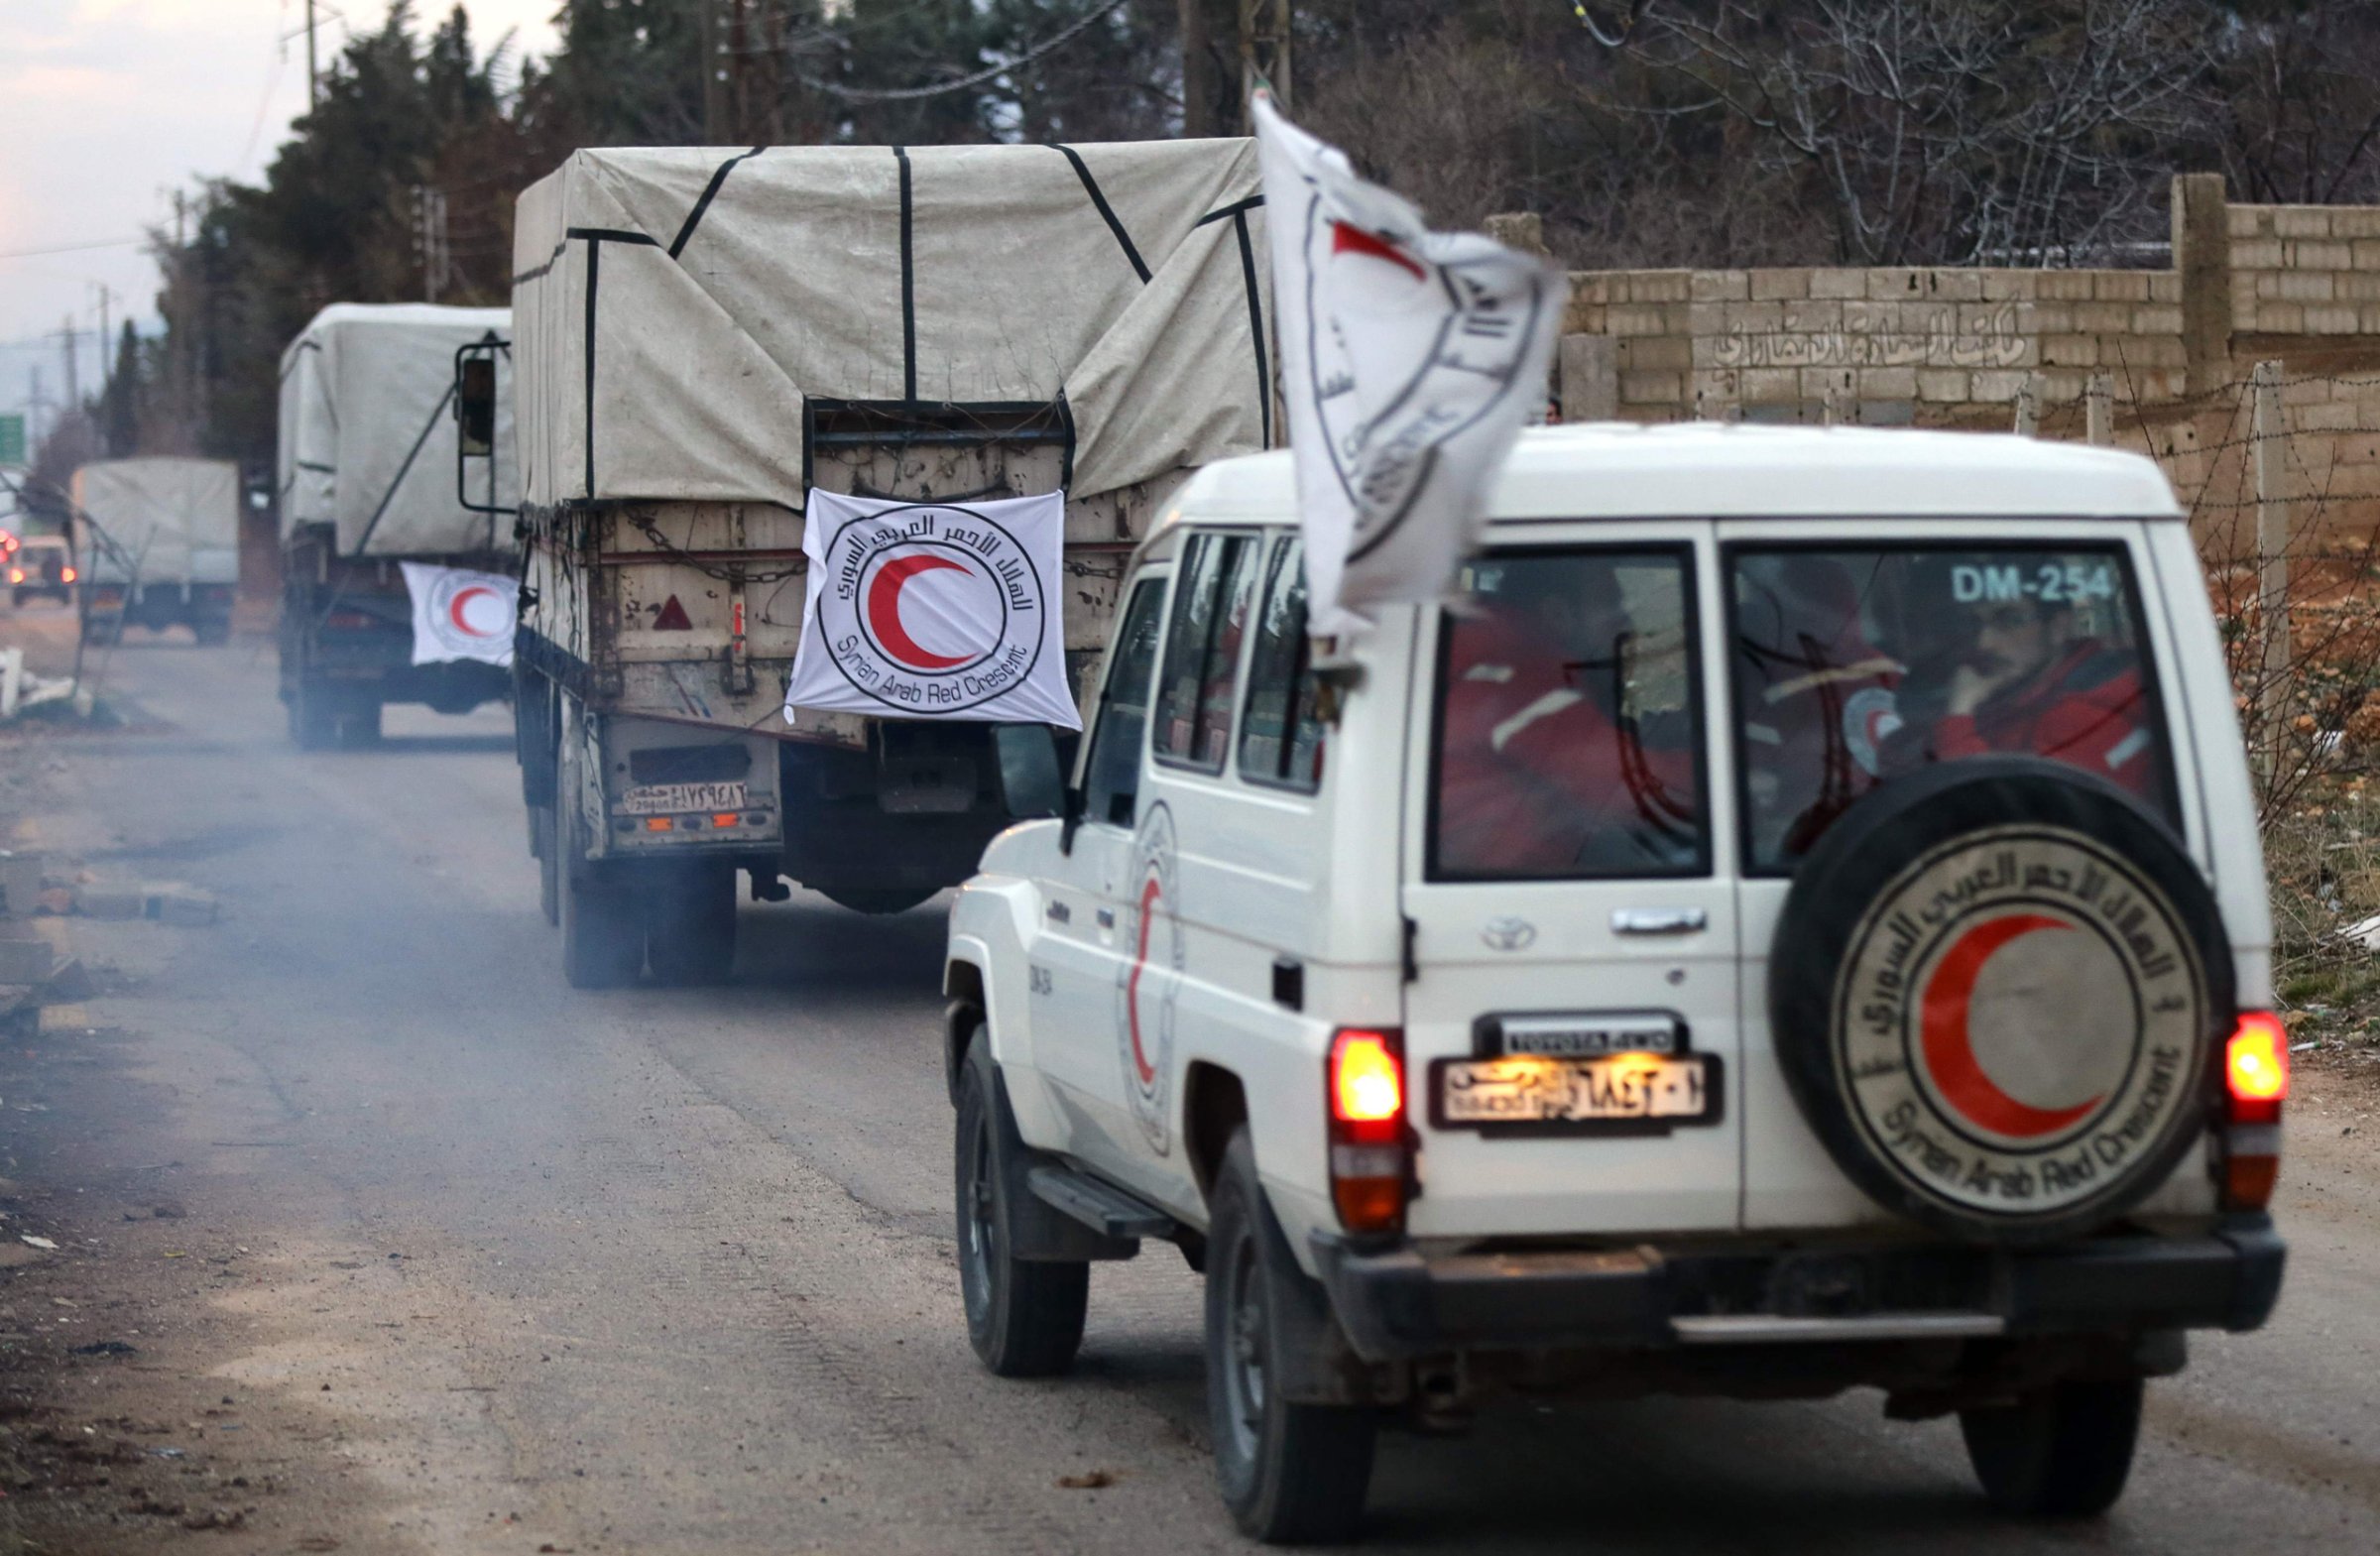 Vehicles from the Syrian Arab Red Crescent drive in a convoy on the outskirts of the besieged rebel-held Syrian town of Madaya, on Jan. 11, 2016. Dozens of aid trucks headed to Madaya, where more than two dozen people are reported to have starved to death, after an outpouring of international concern and condemnation over the dire conditions in the town, where some 42,000 people are living under a government siege. / AFP / LOUAI BESHARALOUAI BESHARA/AFP/Getty Images